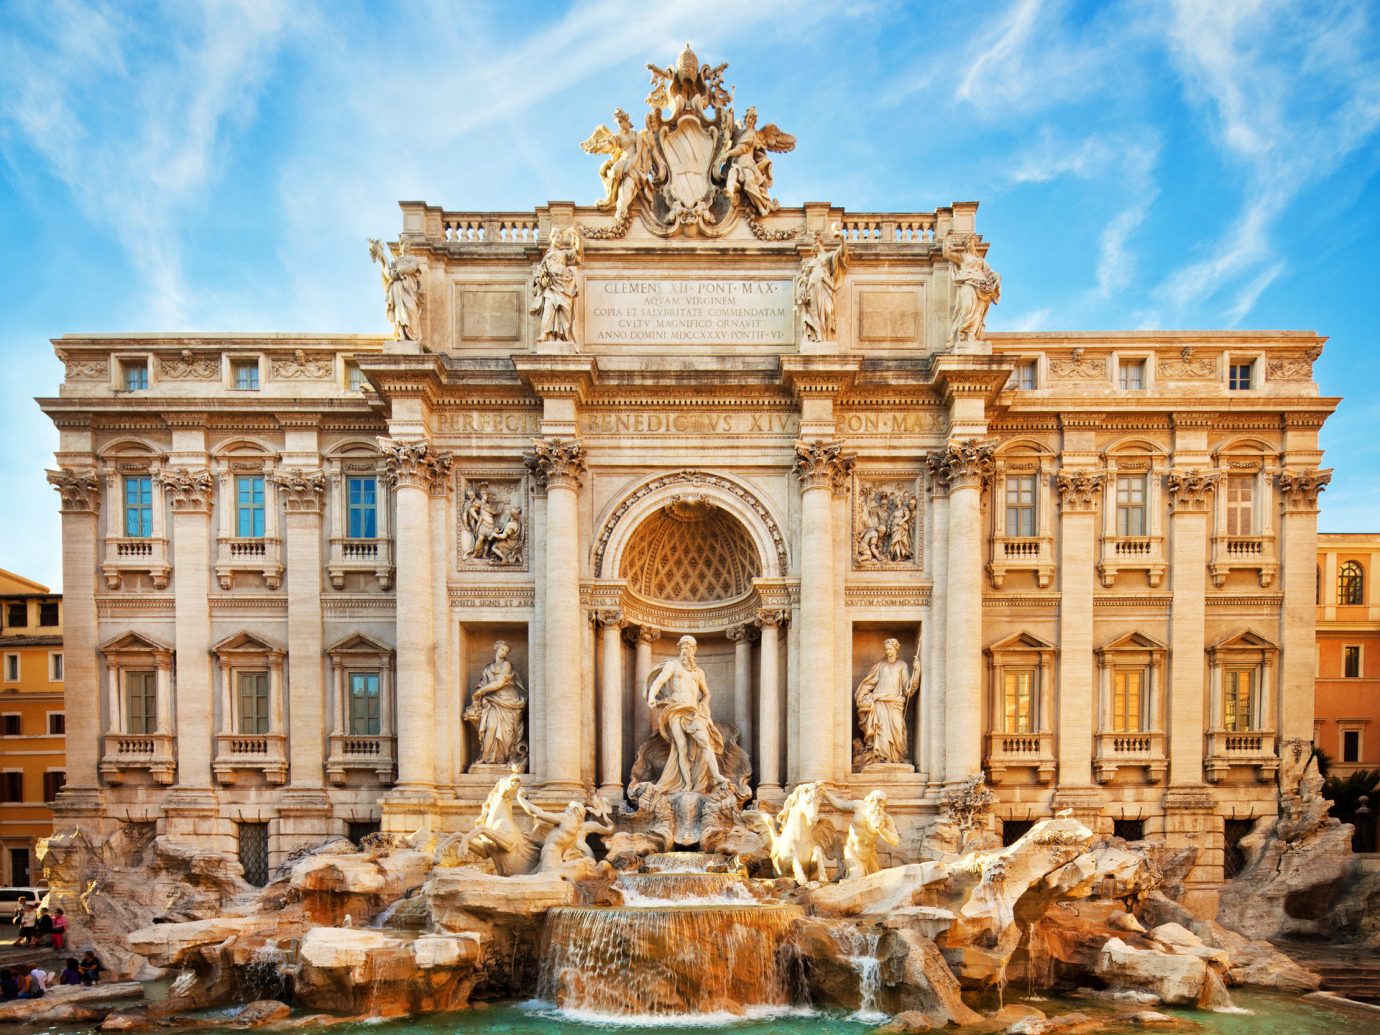 Arts + Culture Landmarks Travel Tips Trip Ideas building sky outdoor landmark fountain historic site ancient rome palace human settlement ancient history Architecture plaza water feature ancient roman architecture facade monument basilica stone